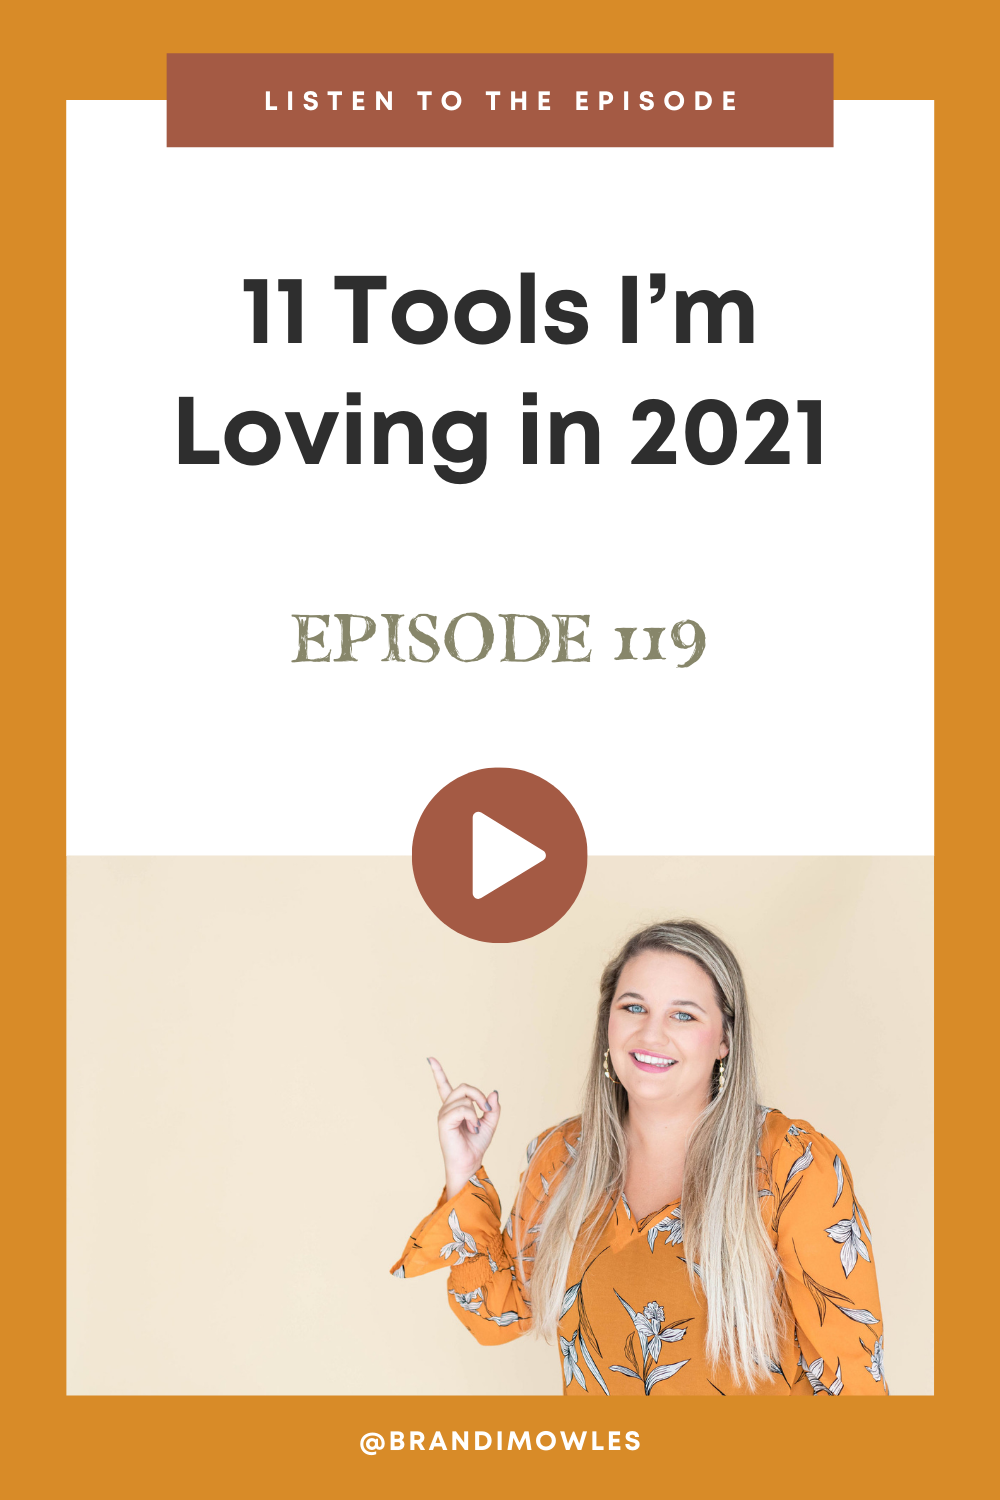 Picture of Brandi Mowles on podcast featured image for Serve Scale Soar podcast titled 11 Tools I'm Loving in 2021